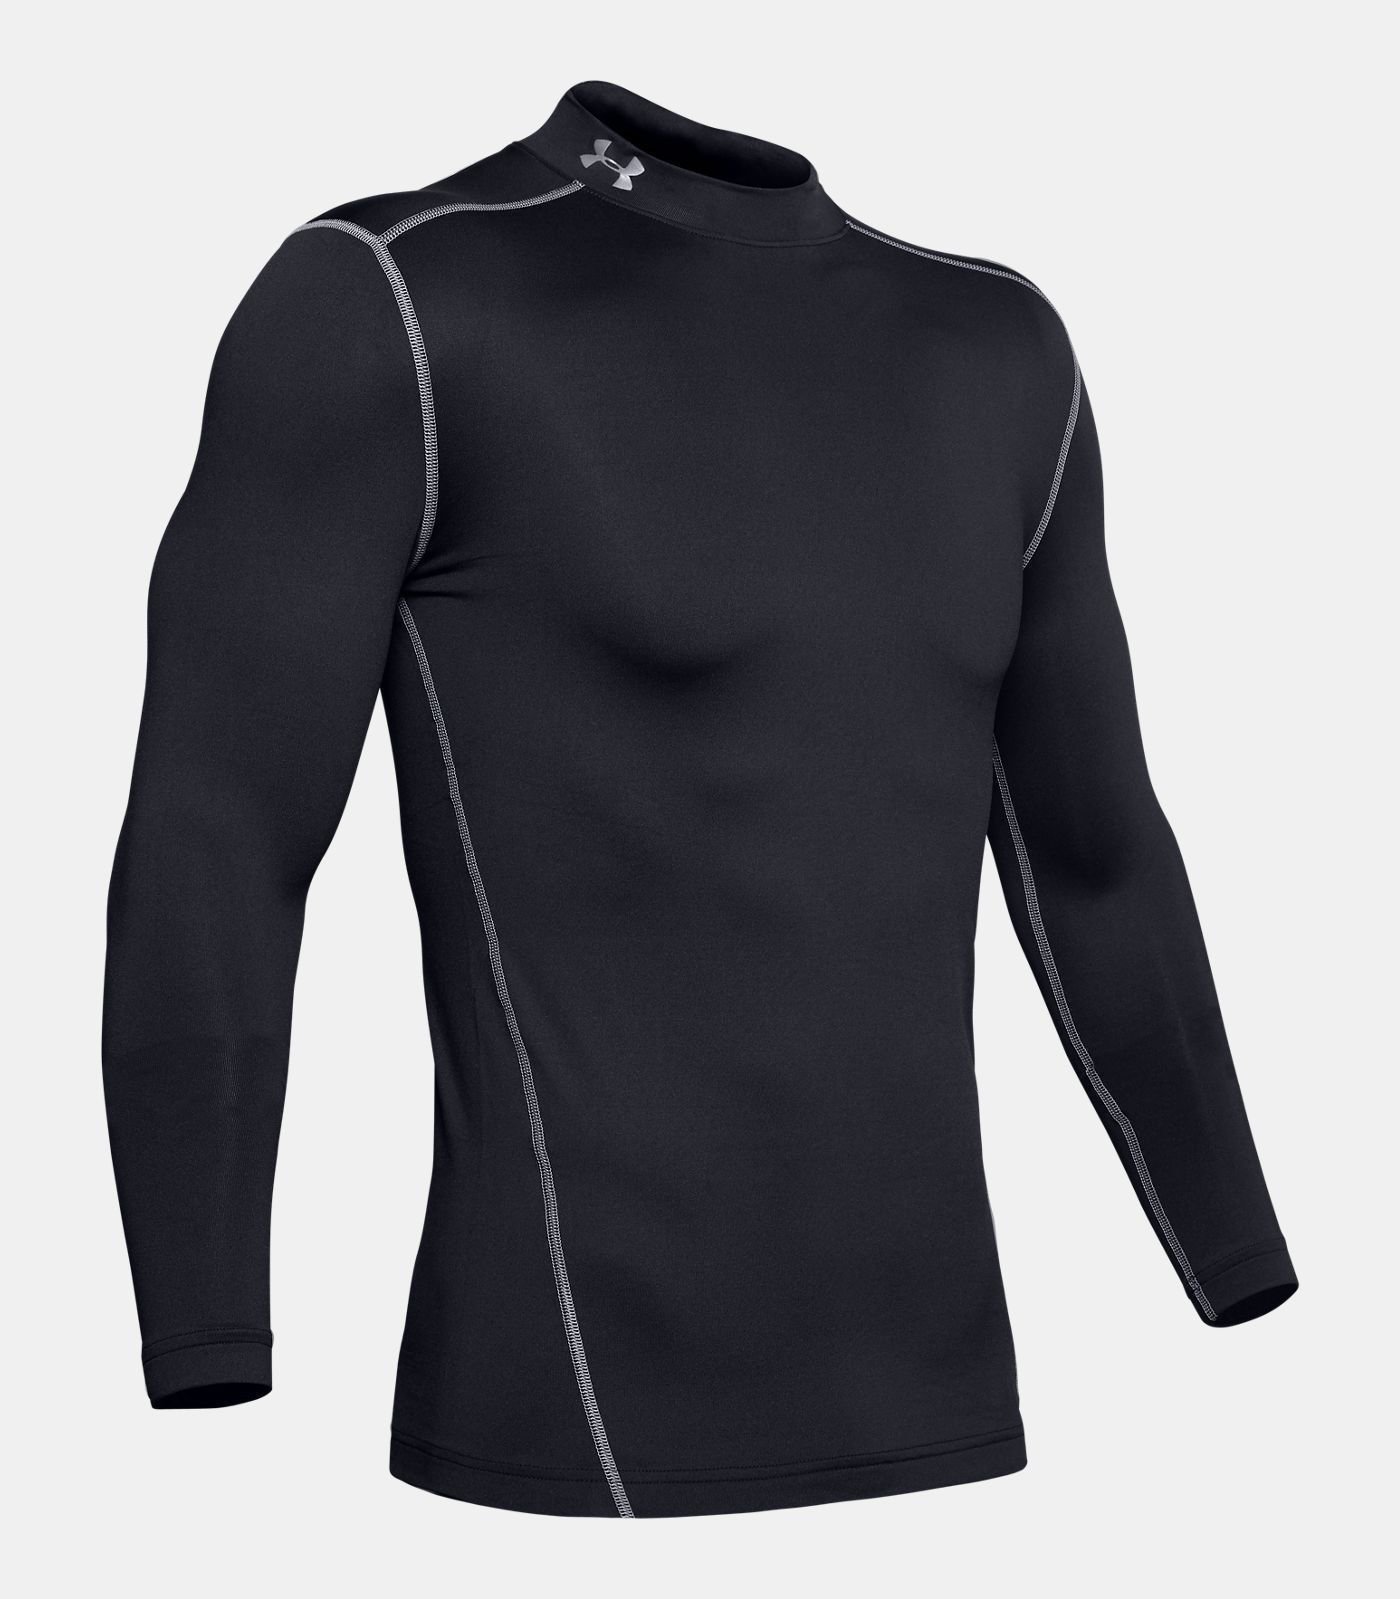 Thermal Clothing Under Armour ColdGear Compression Mock Black/Steel S